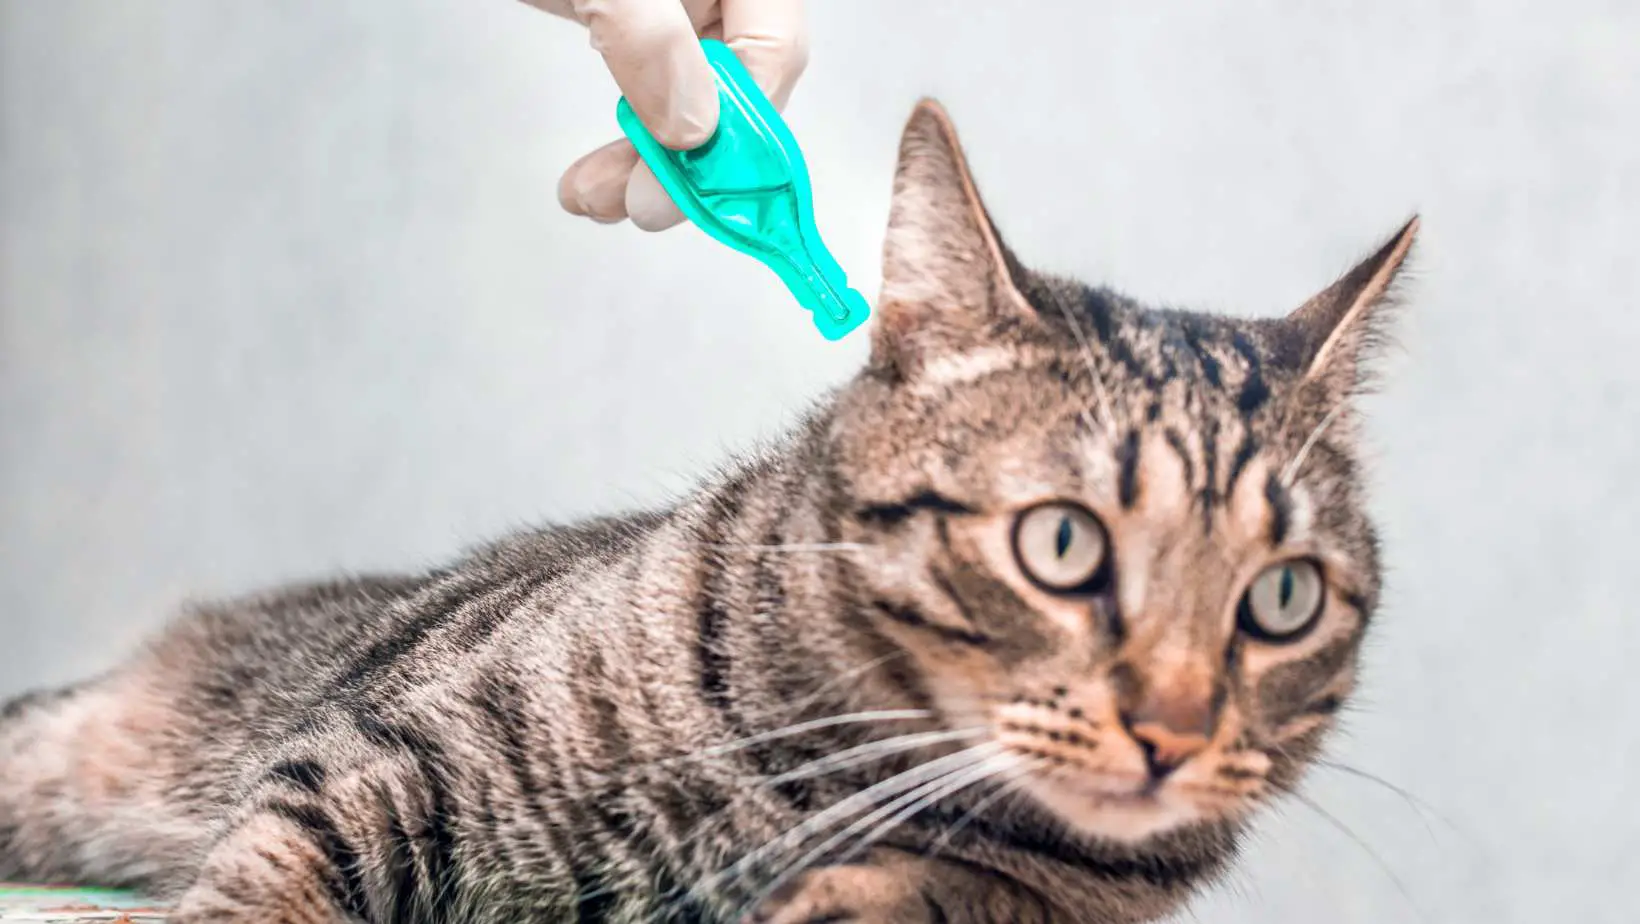 How to prevent cat fleas ? What to do if your cat has fleas?